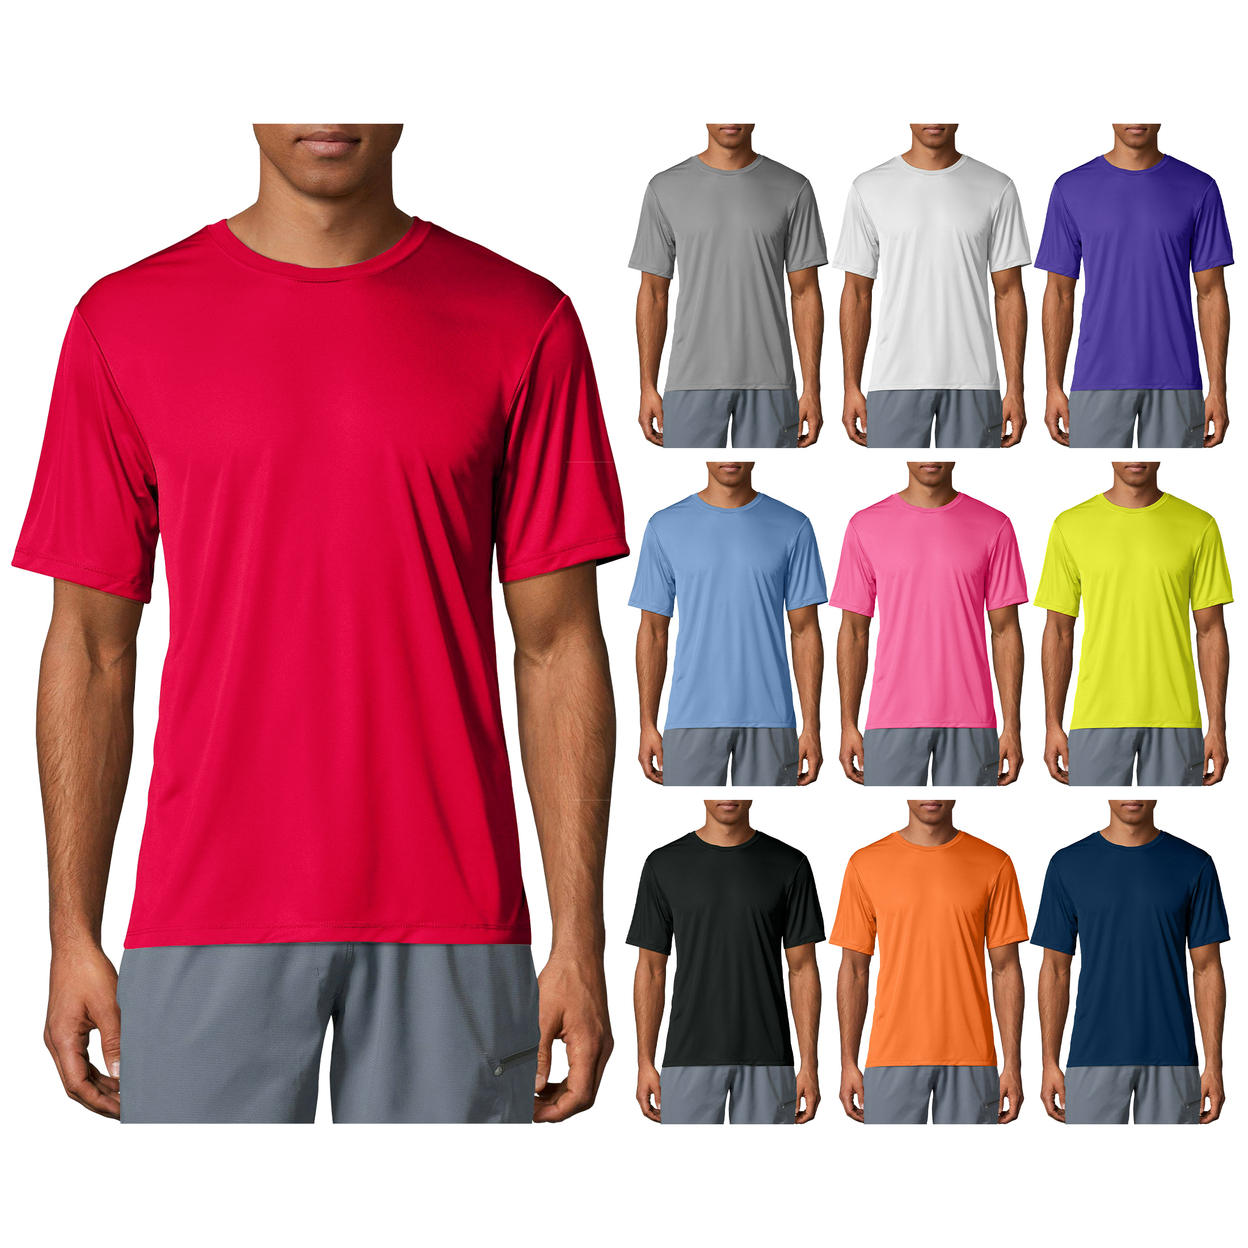 6-Pack: Men's Moisture Wicking Cool Dri-Fit Performance Short Sleeve Crew Neck T-Shirts - X-large